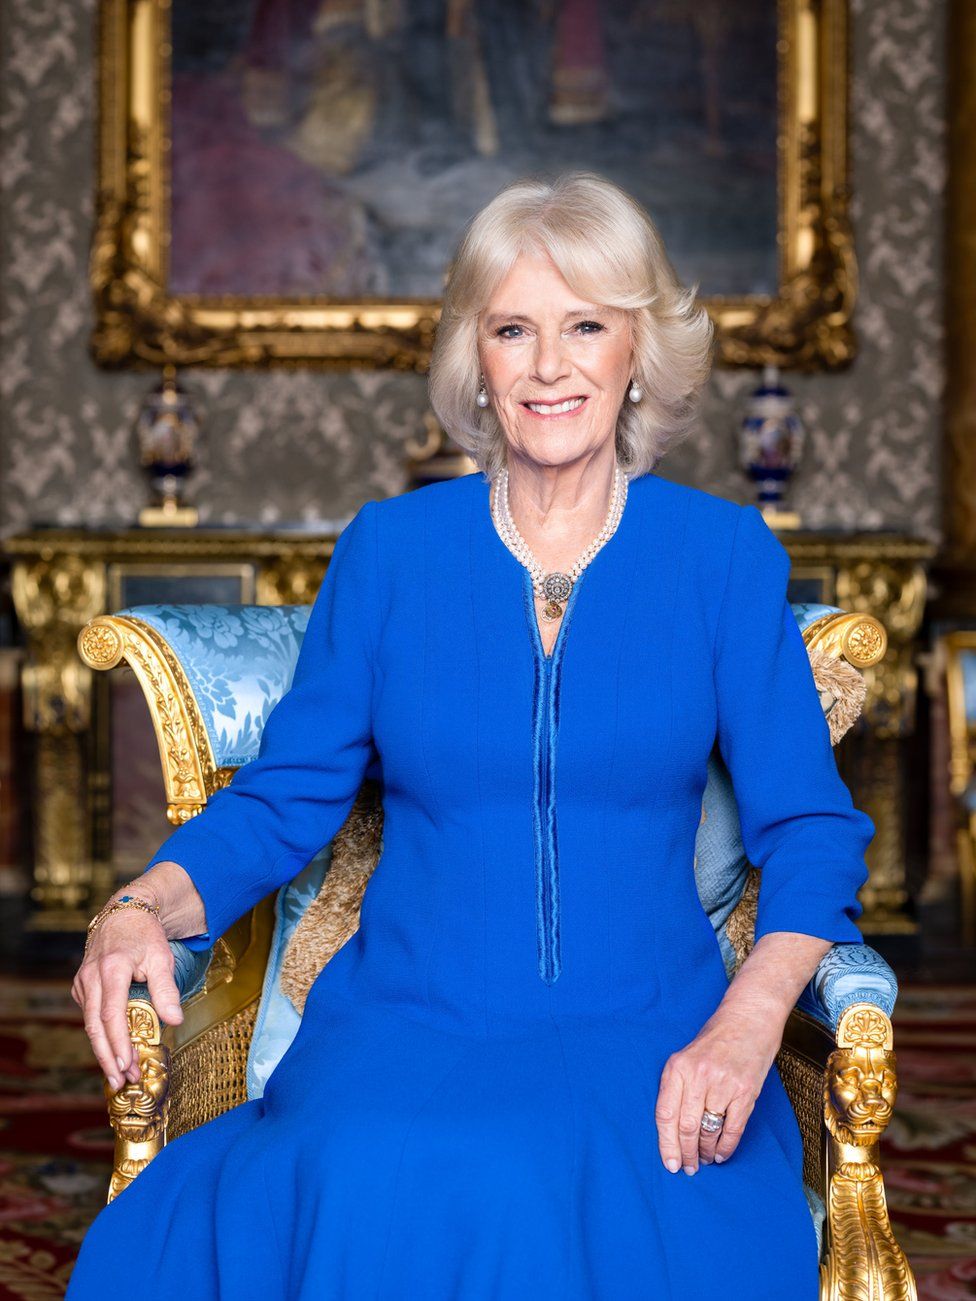 The Queen Consort smiles while wearing blue for the new pictures